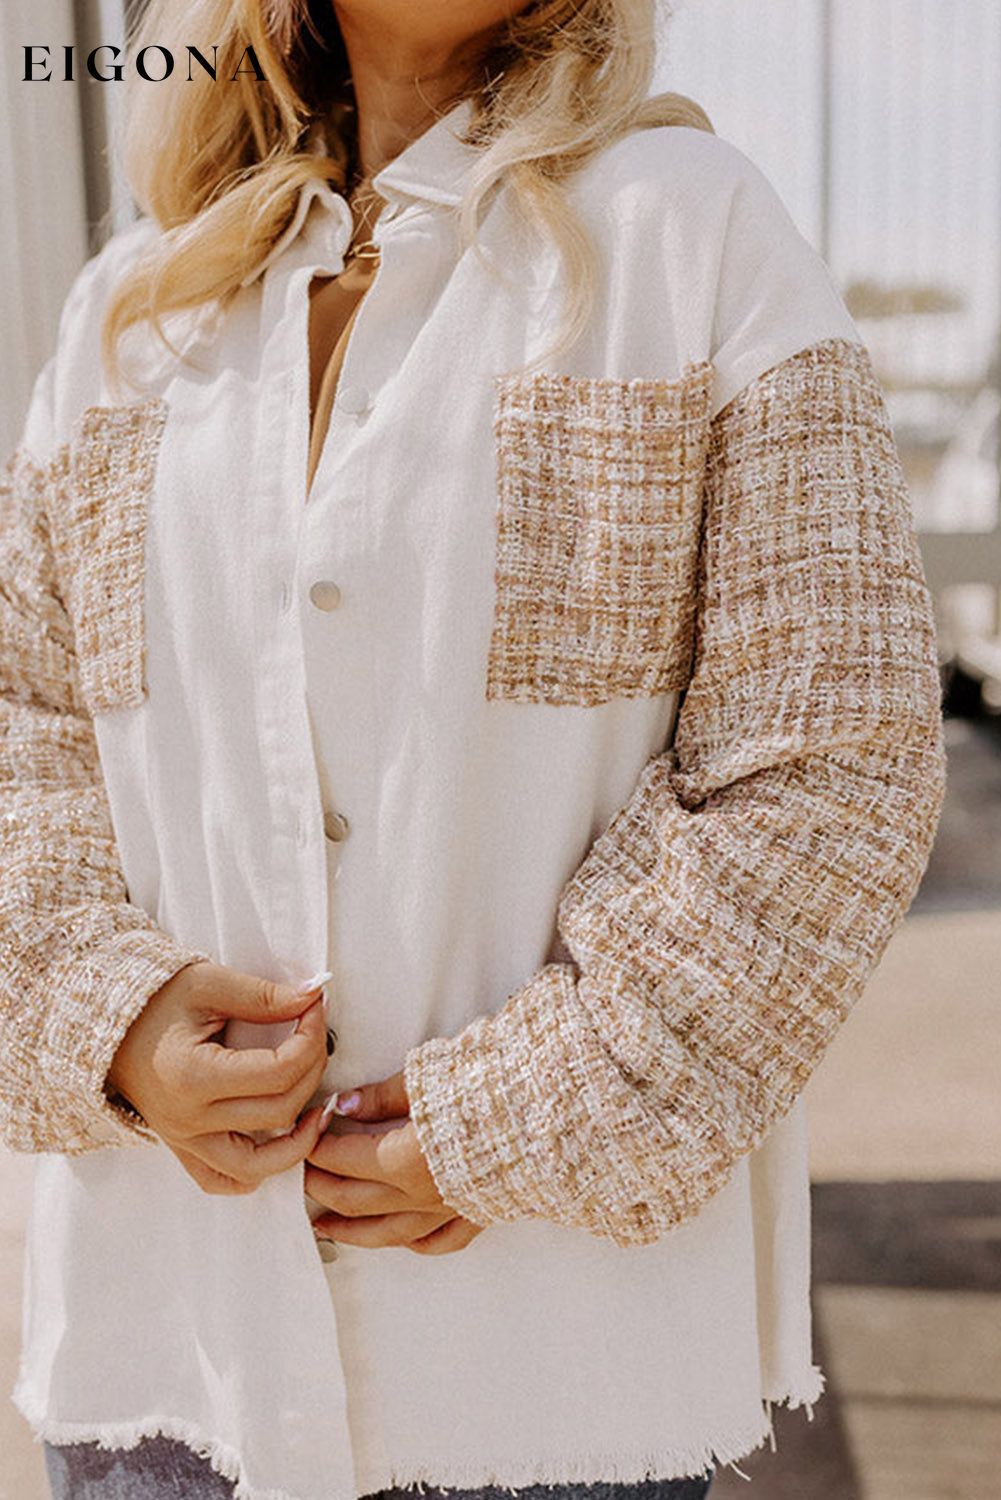 White Plus Size Tweed Patchwork Raw Hem Long Sleeve Button down shirt Jacket clothes long sleeve shirt long sleeve shirts long sleeve top long sleeve tops shirt shirts top tops